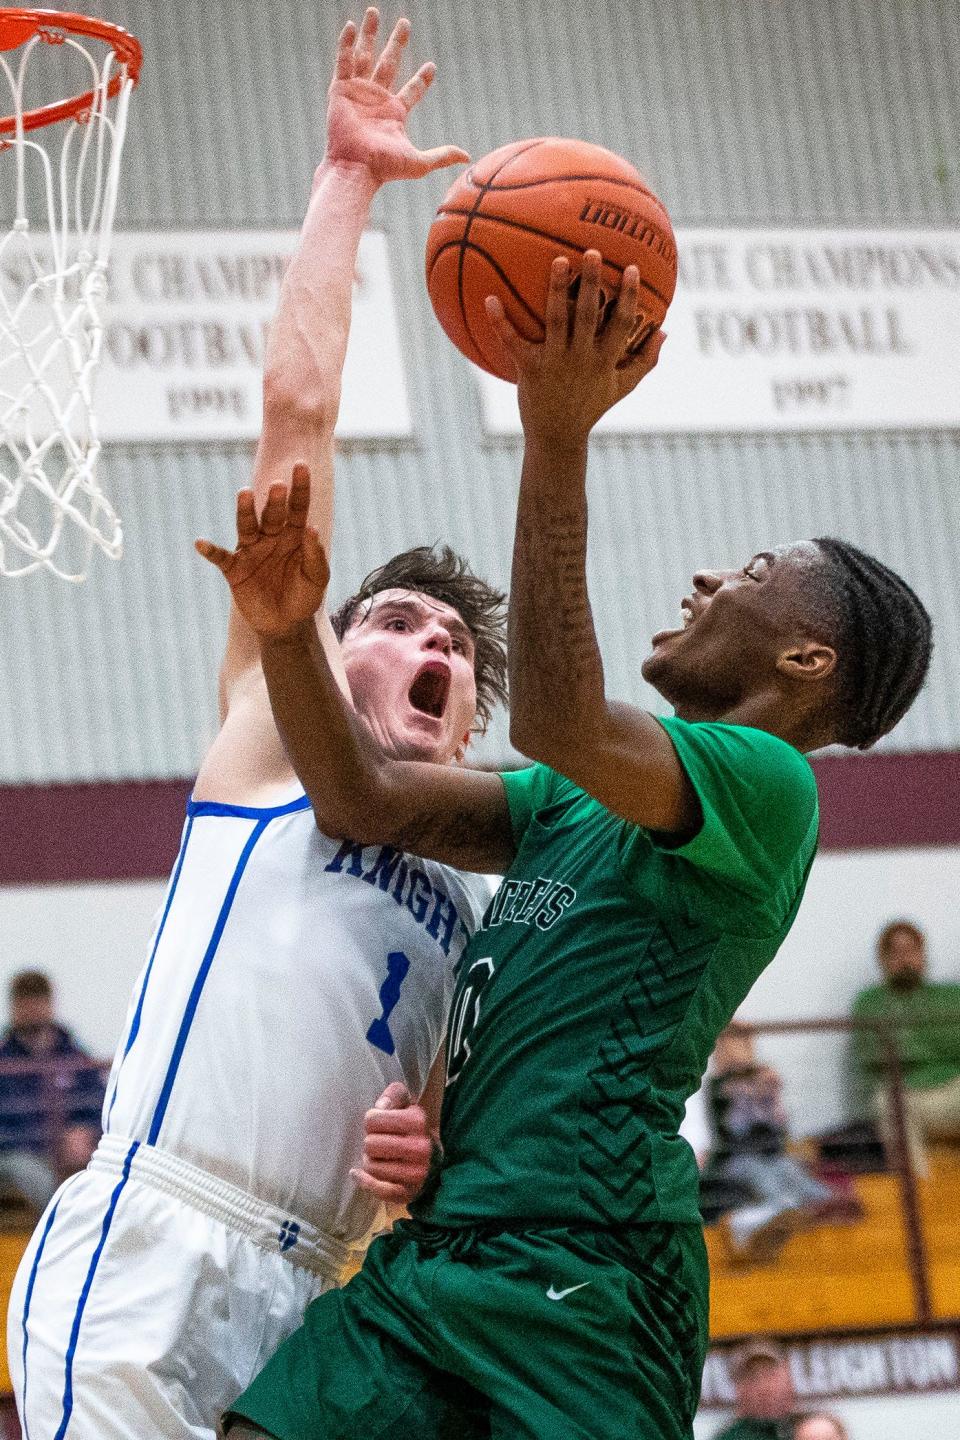 Washington's Terrence Reid (0) drives as Marian's Deaglan Sullivan (1) defends during the Marian vs. Washington sectional semifinal basketball game Friday, March 3, 2023 at Jimtown High School in Elkhart.